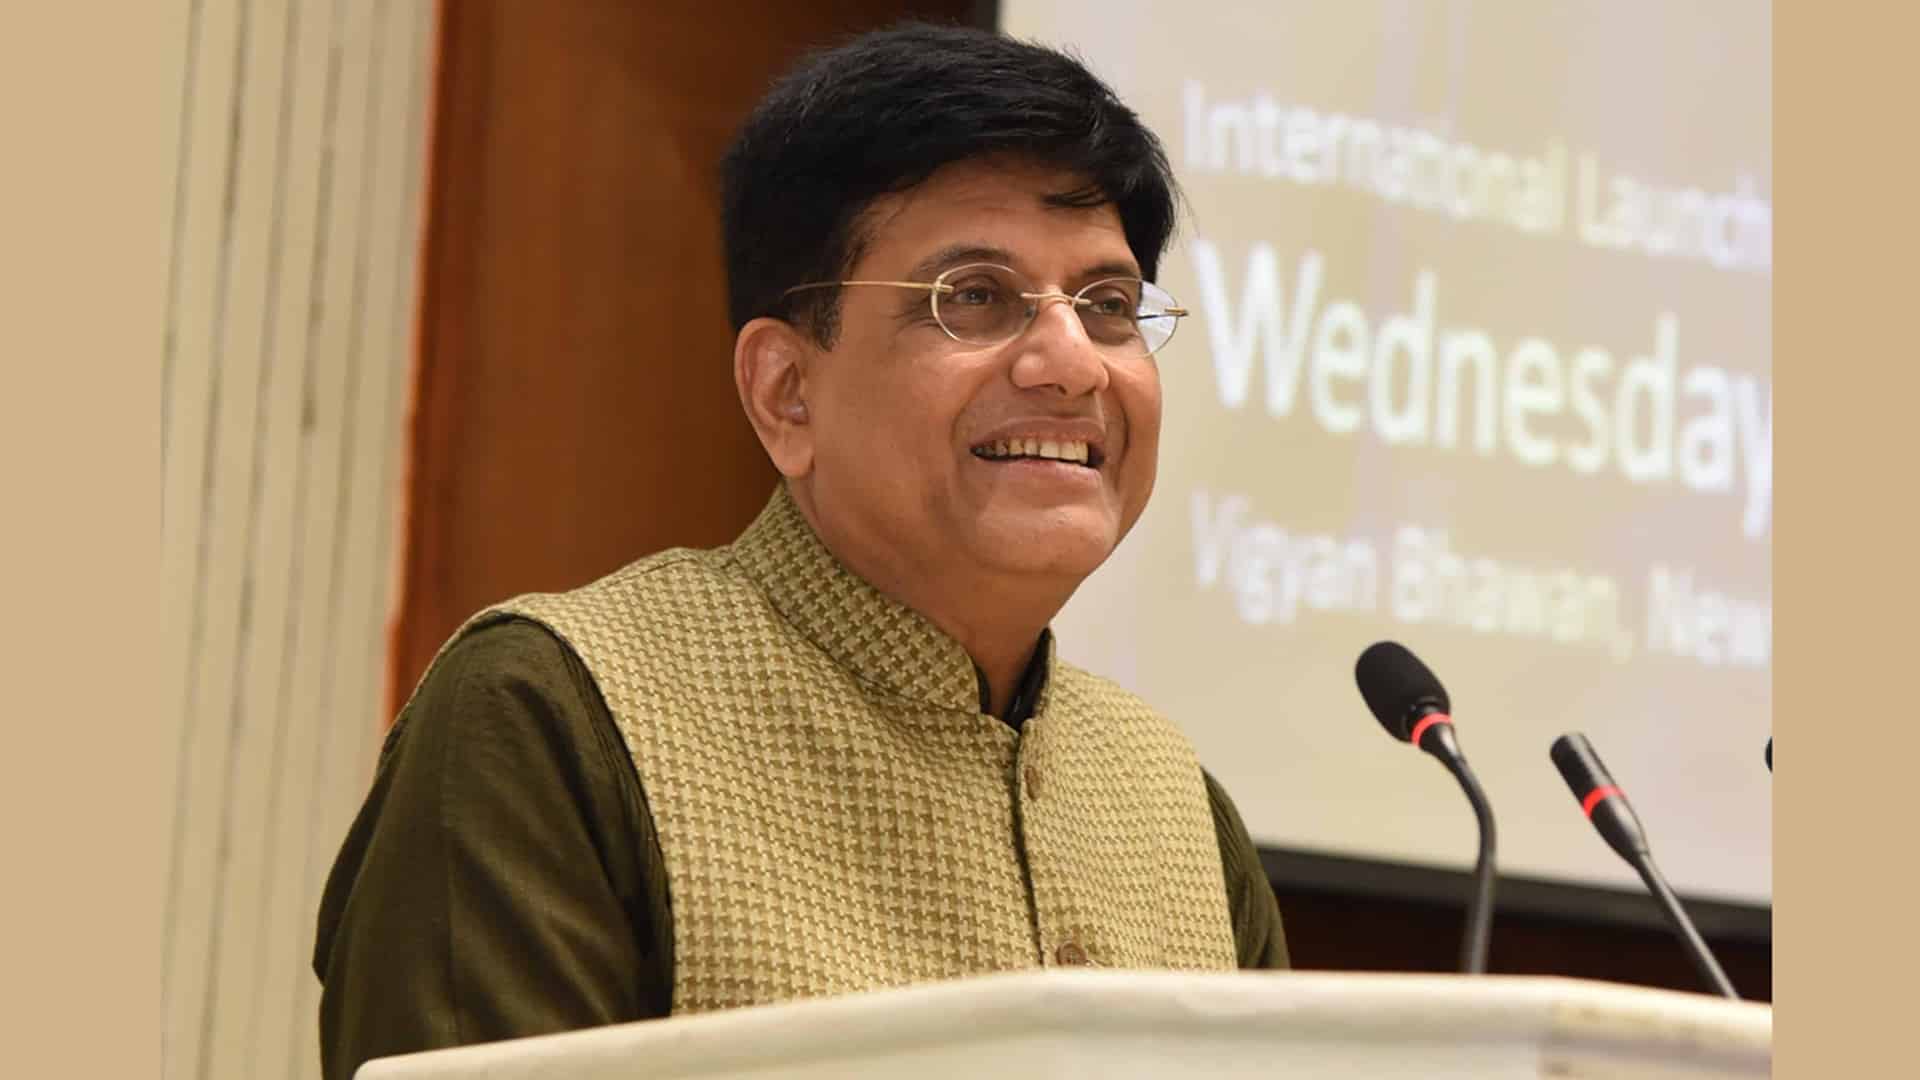 Services exports touched all-time high at USD 250 bn in FY22: Goyal